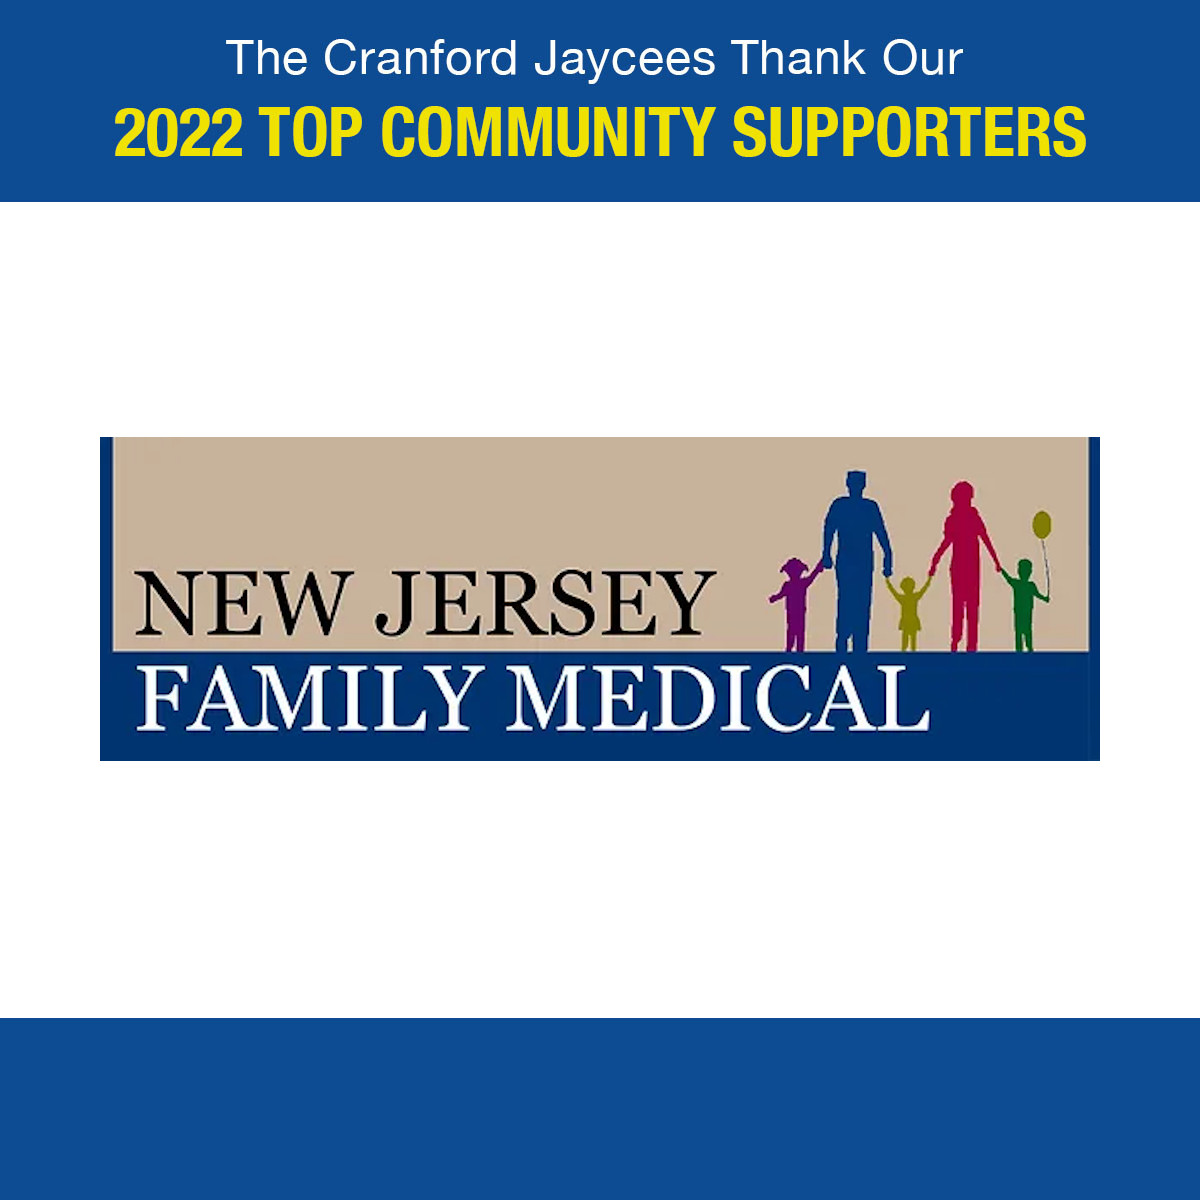 New Jersey Family Medical